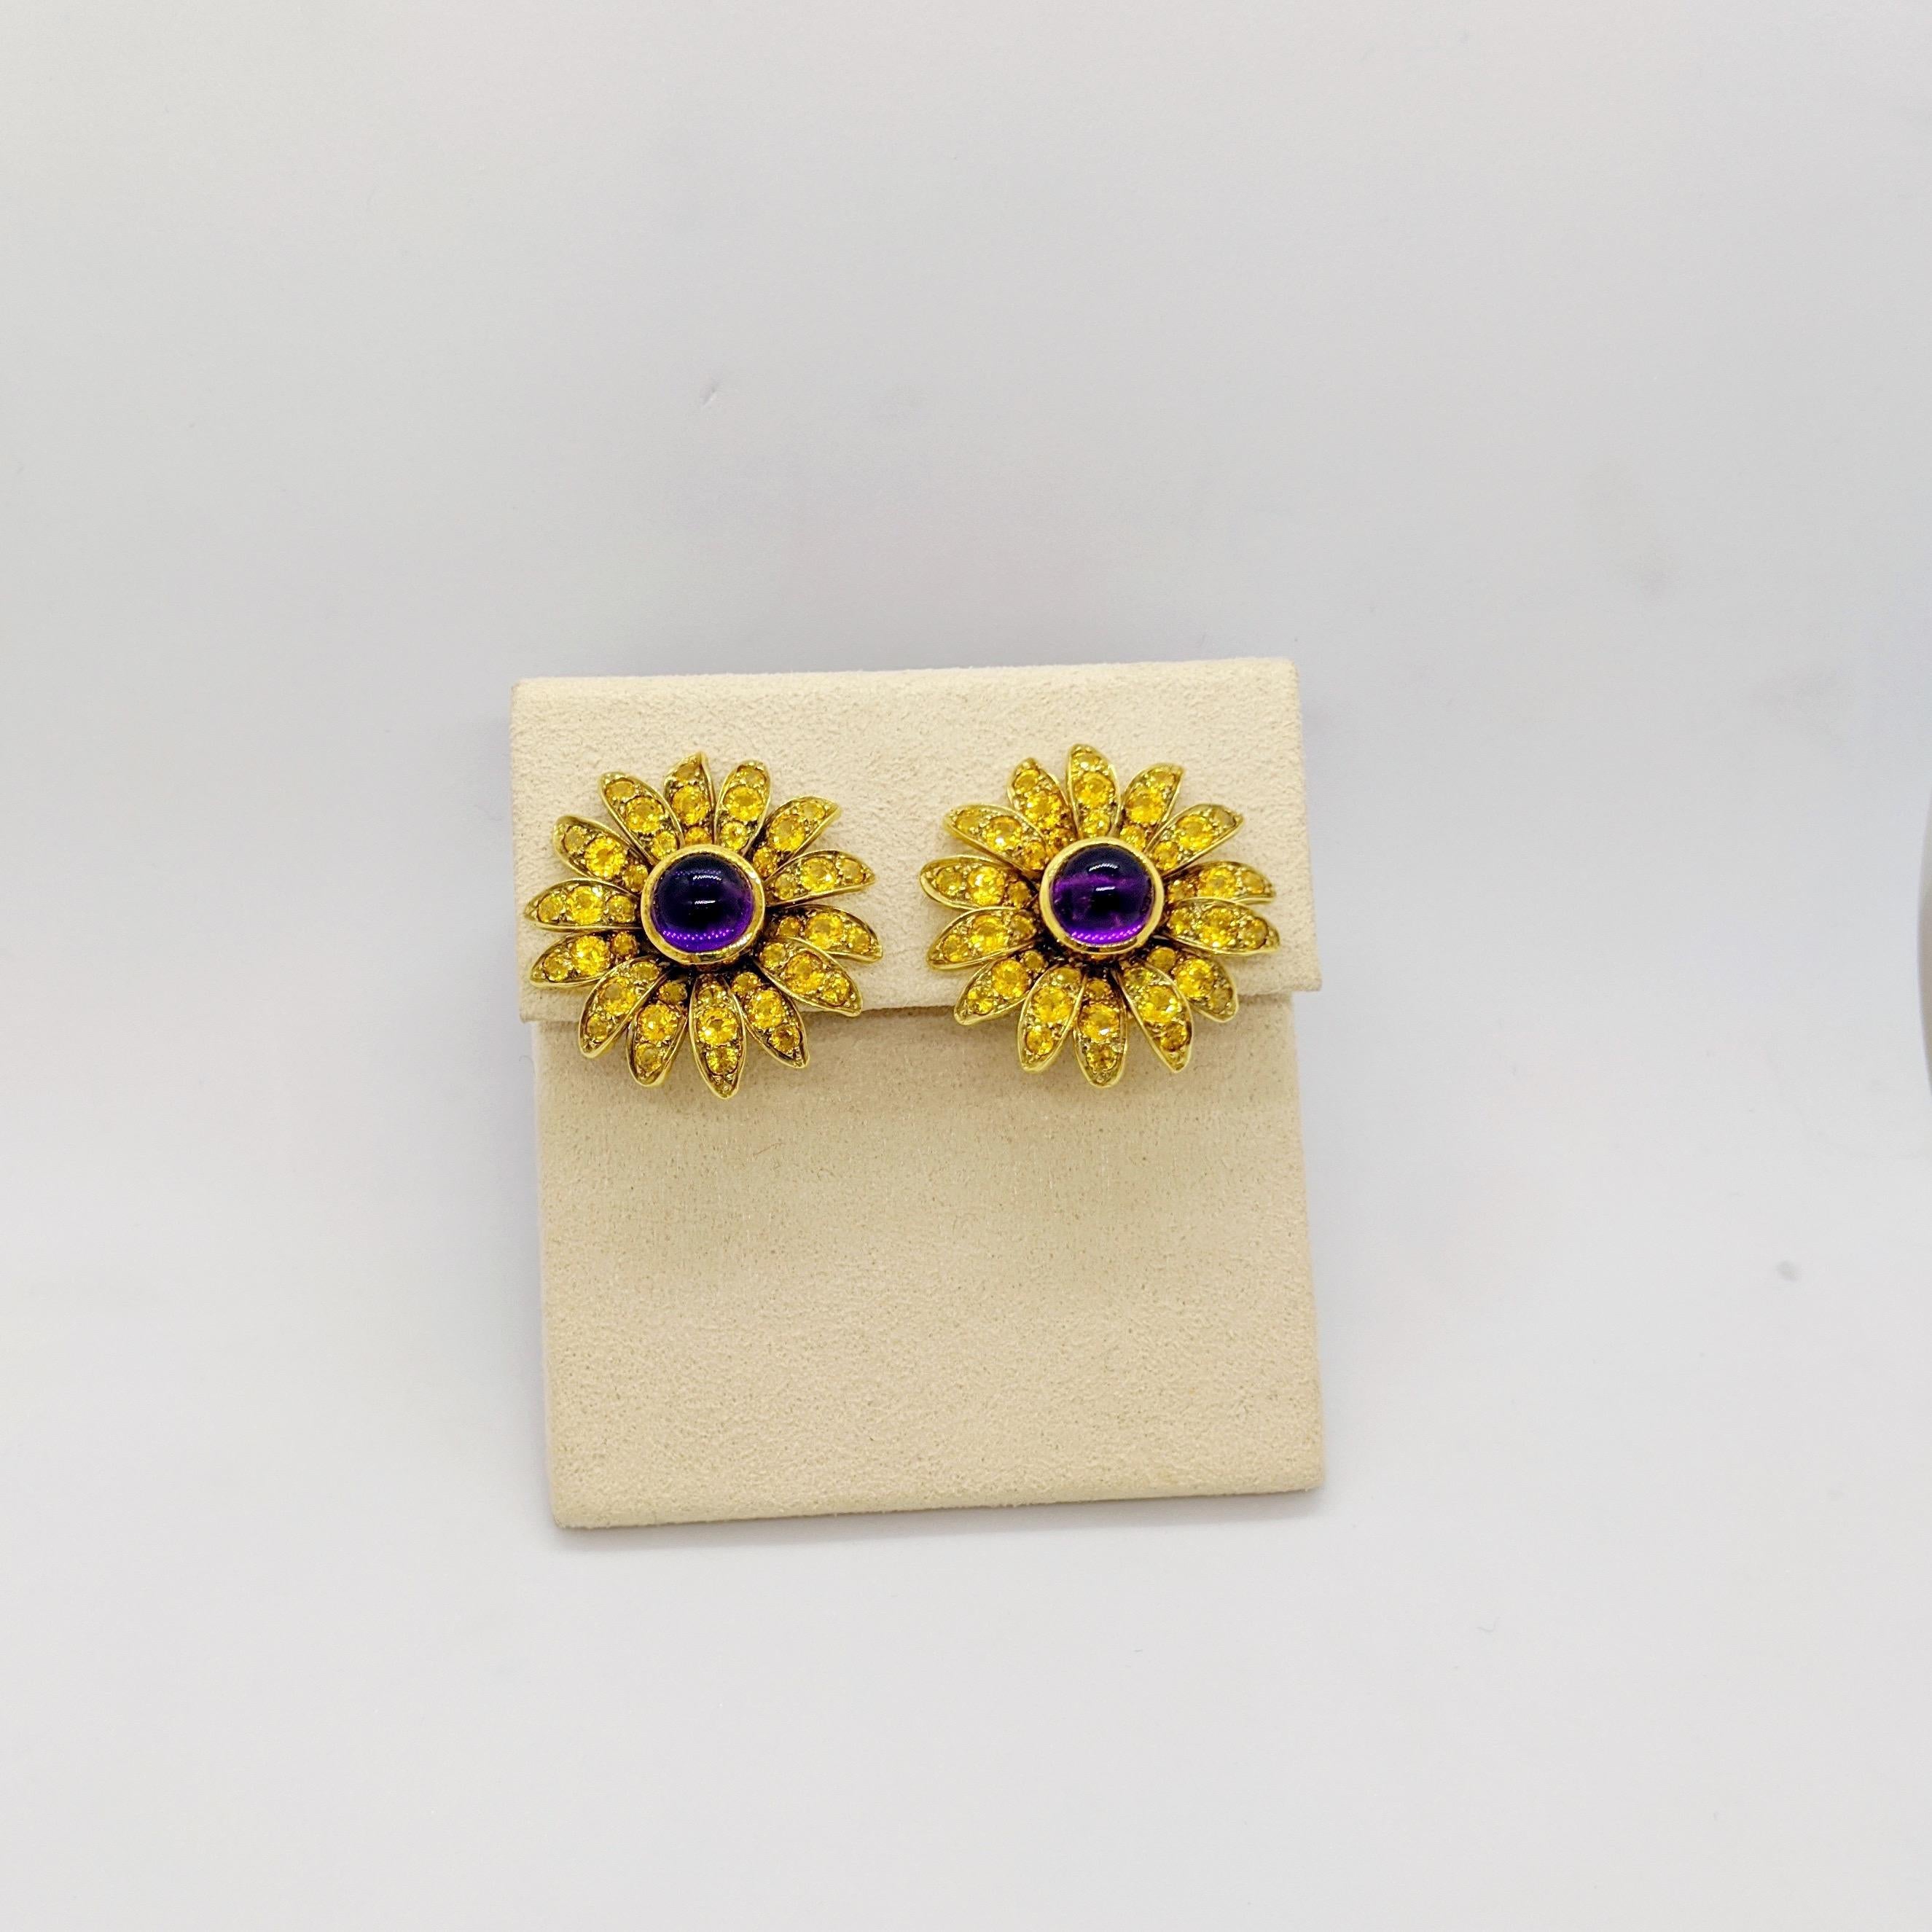 Hello Sunshine!!
18 karat yellow gold Sunflower earrings . Each of the 14 petals have been meticulously set with round brilliant cut Yellow Sapphires. The center of the flower is set with a cabachon Amethyst in a bezel setting. Each earring measures